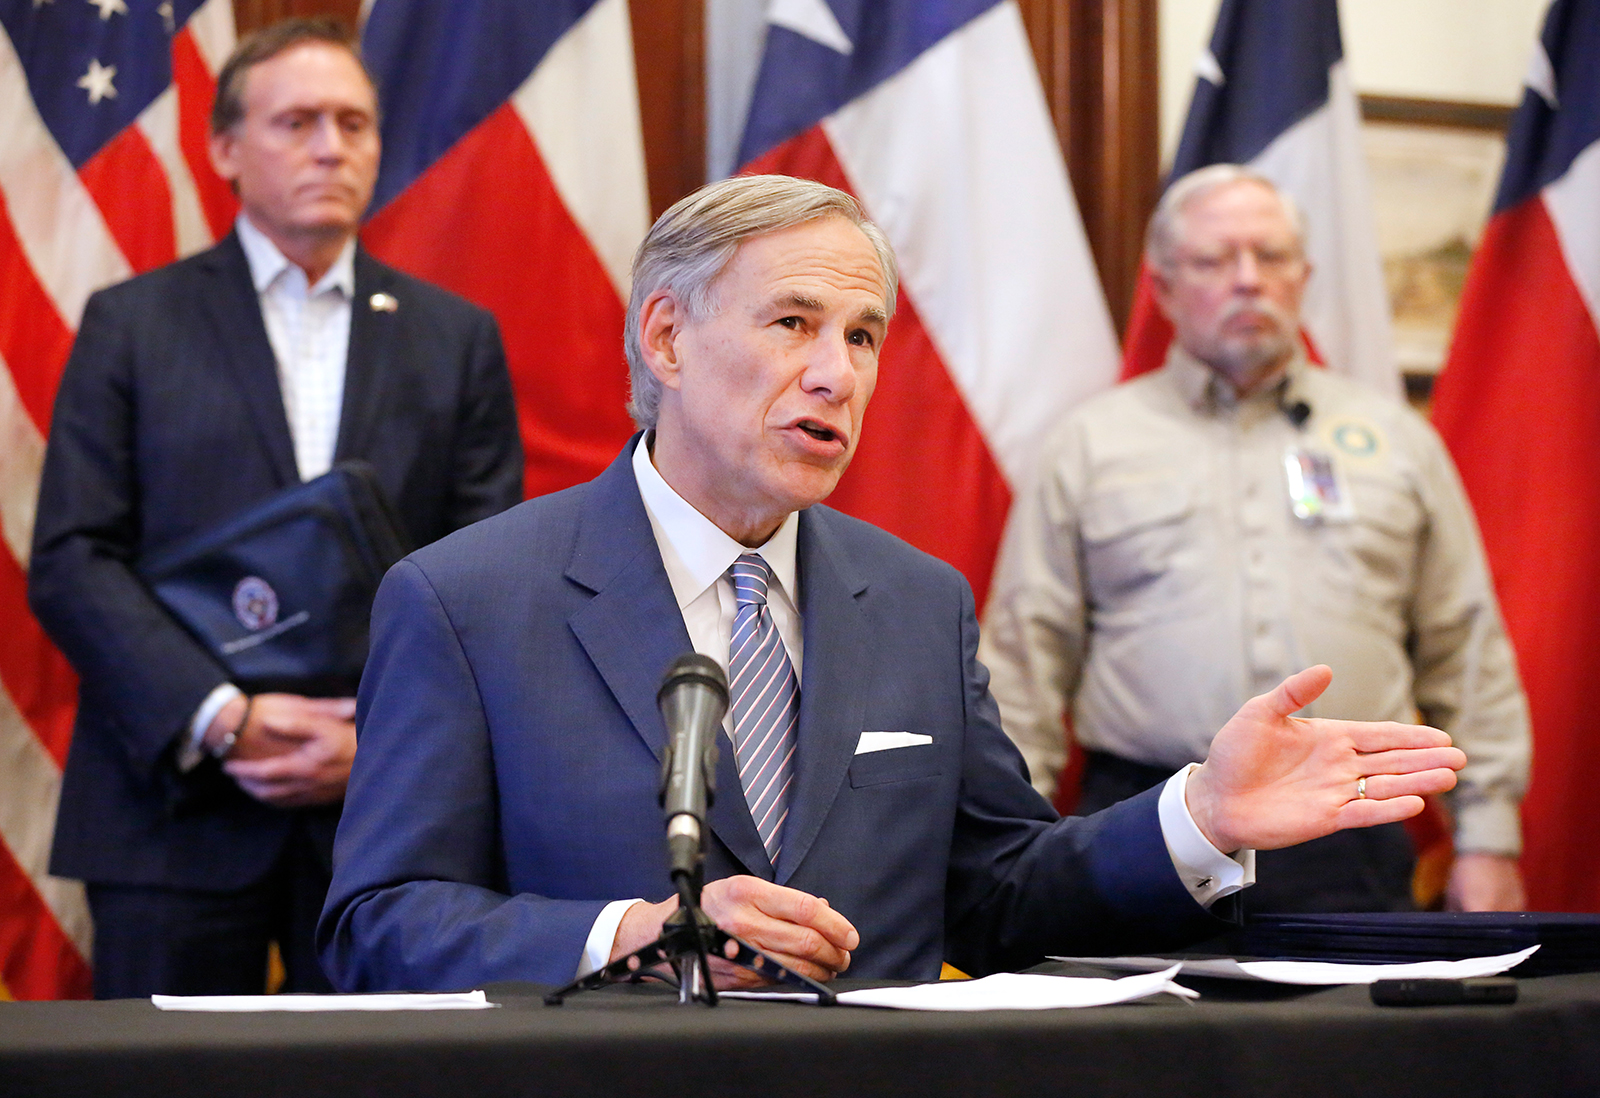 Texas Governor Greg Abbott during a press conference at the Texas State Capitol in Austin, on March 29.